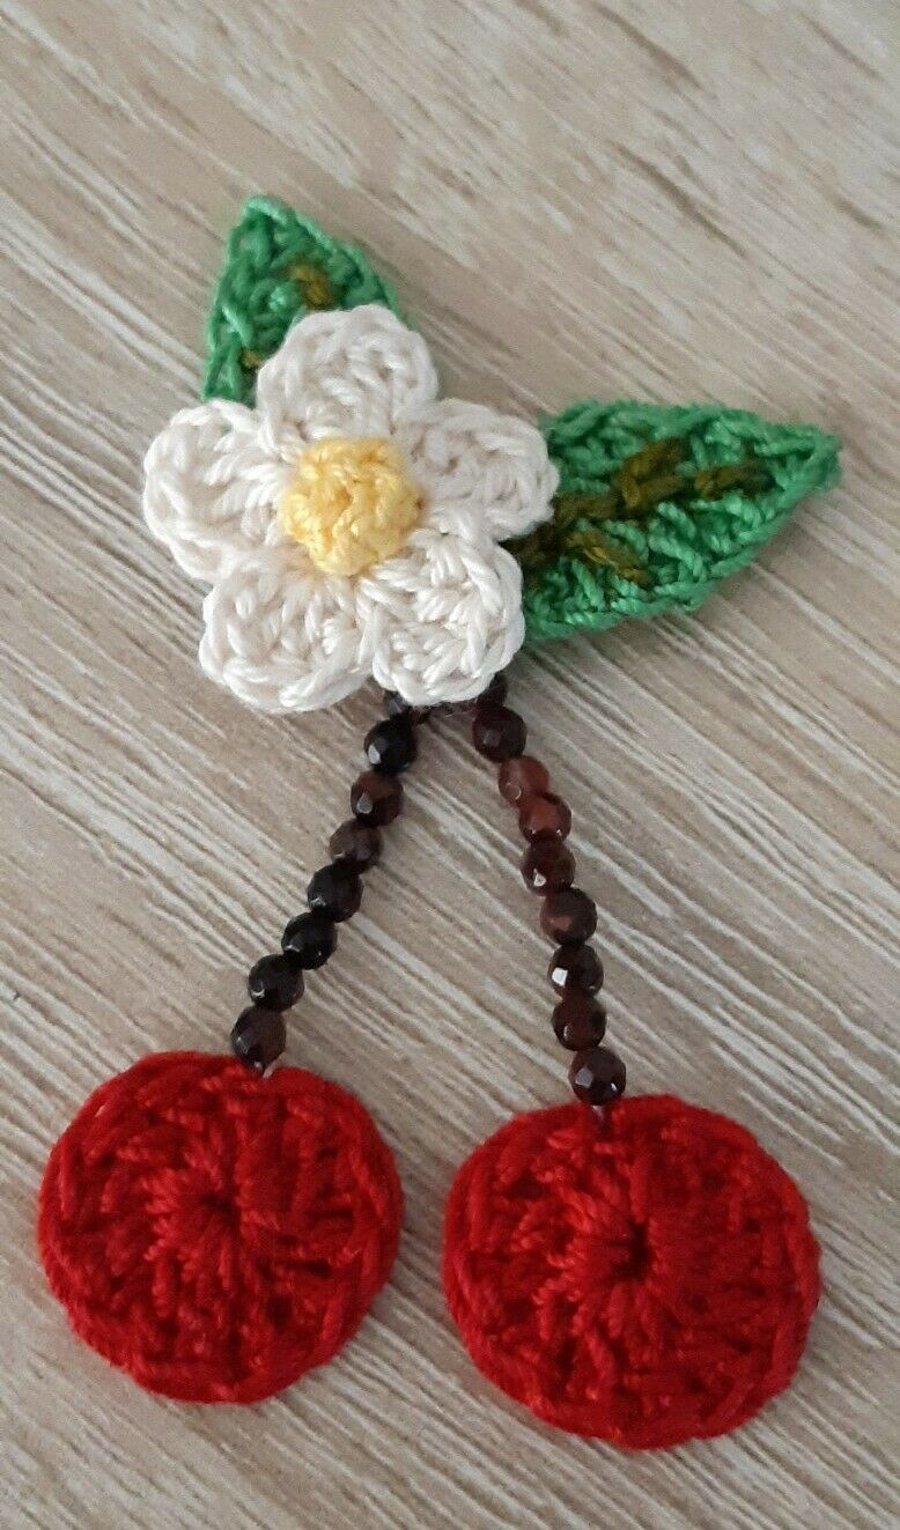 Crochet Cherries -Craft- Embellishments - Clothes Appliques- Brooch Style